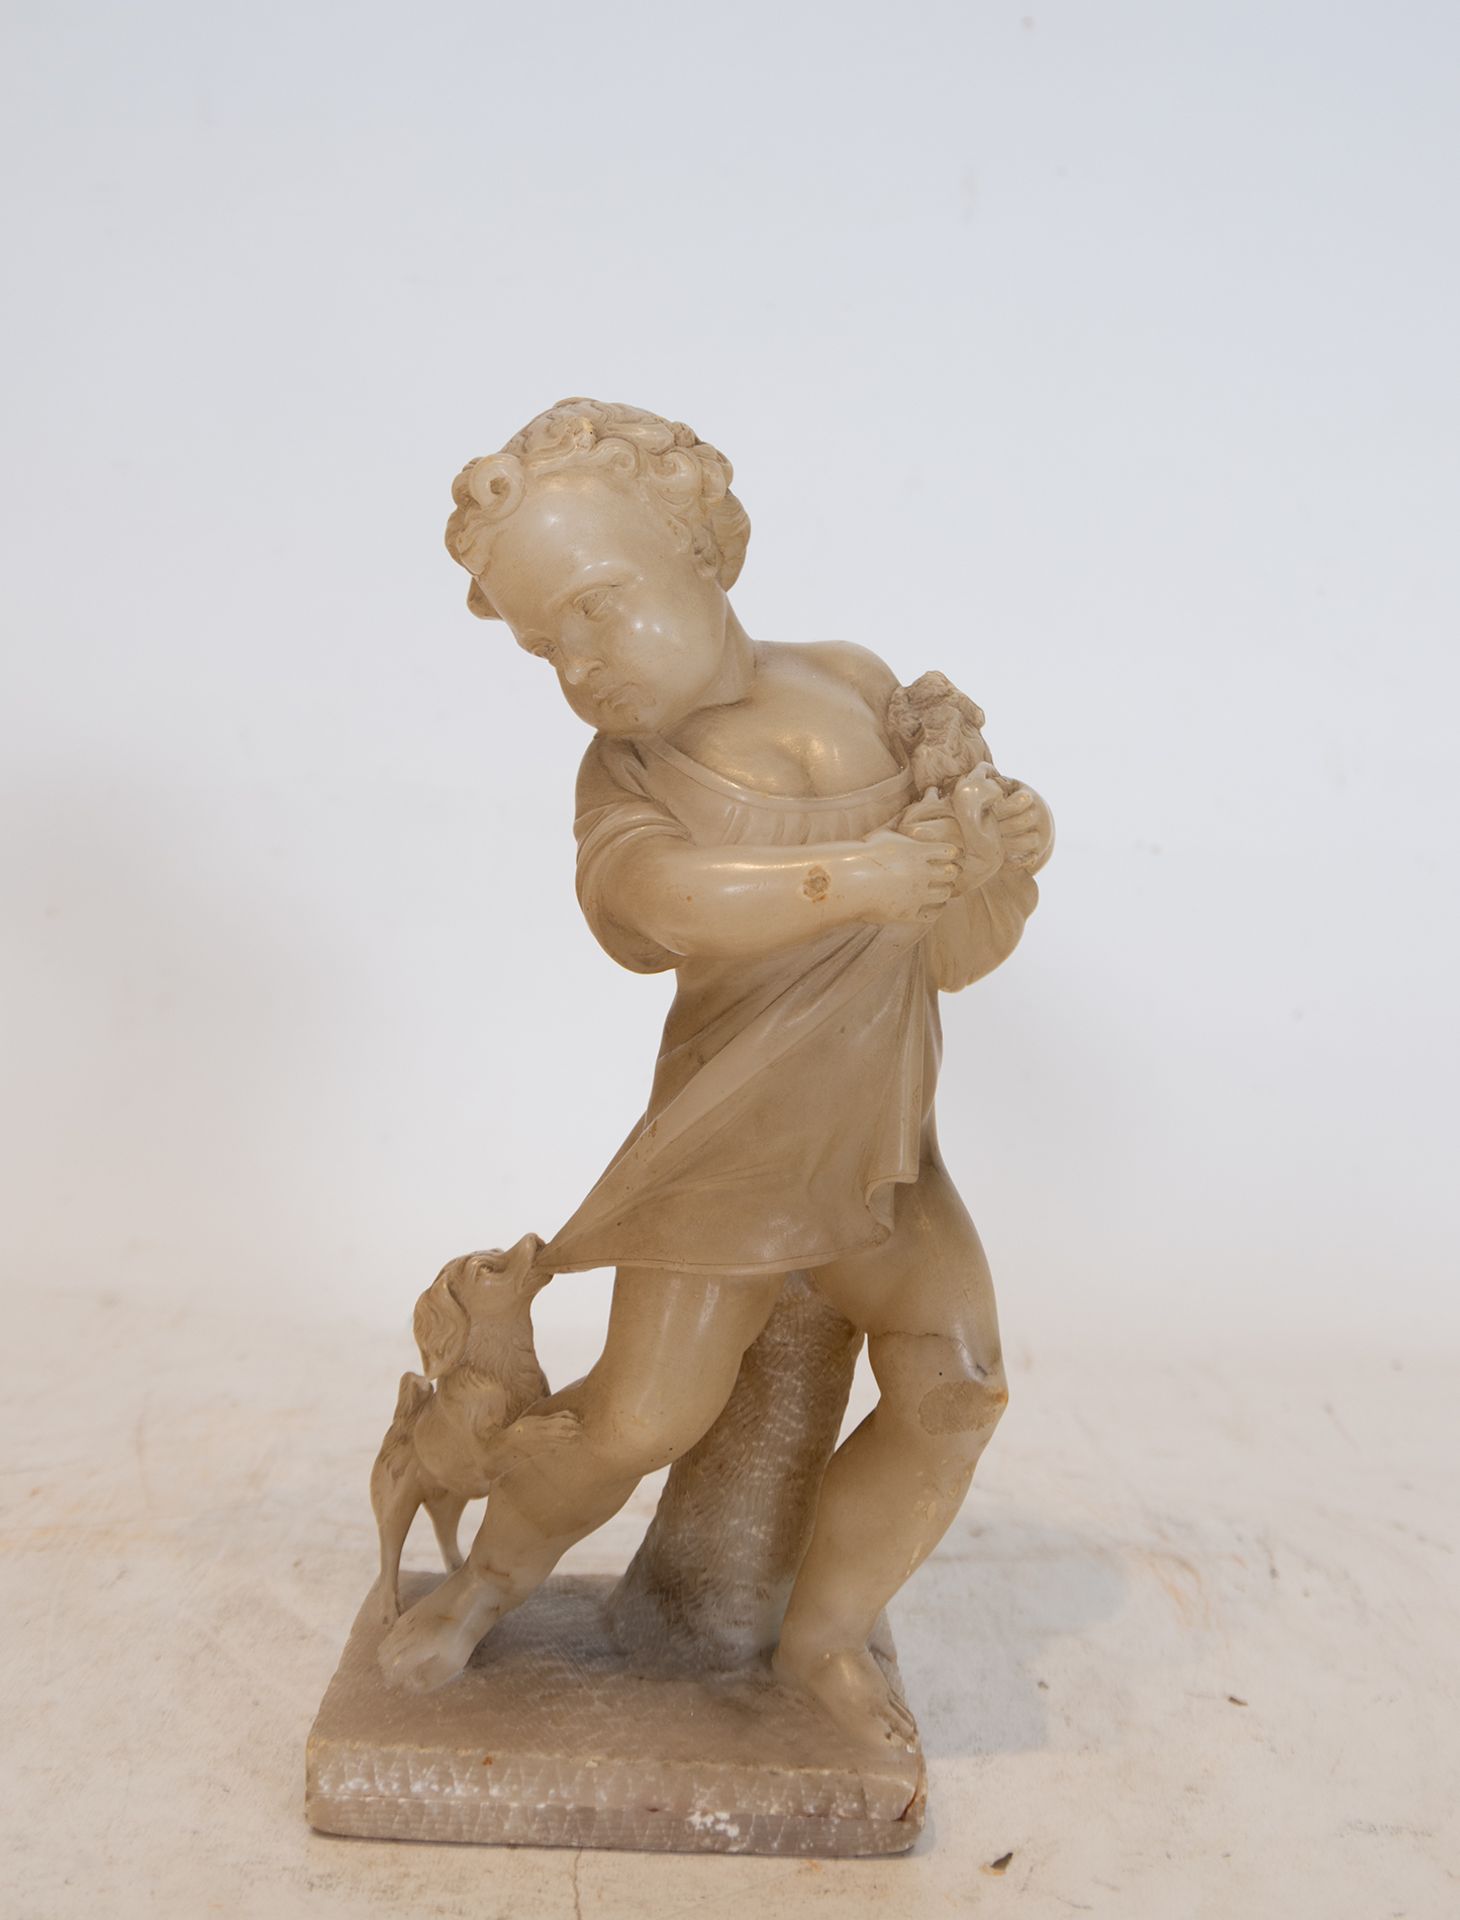 Boy with Dog in Alabaster, Portuguese school of the 18th century